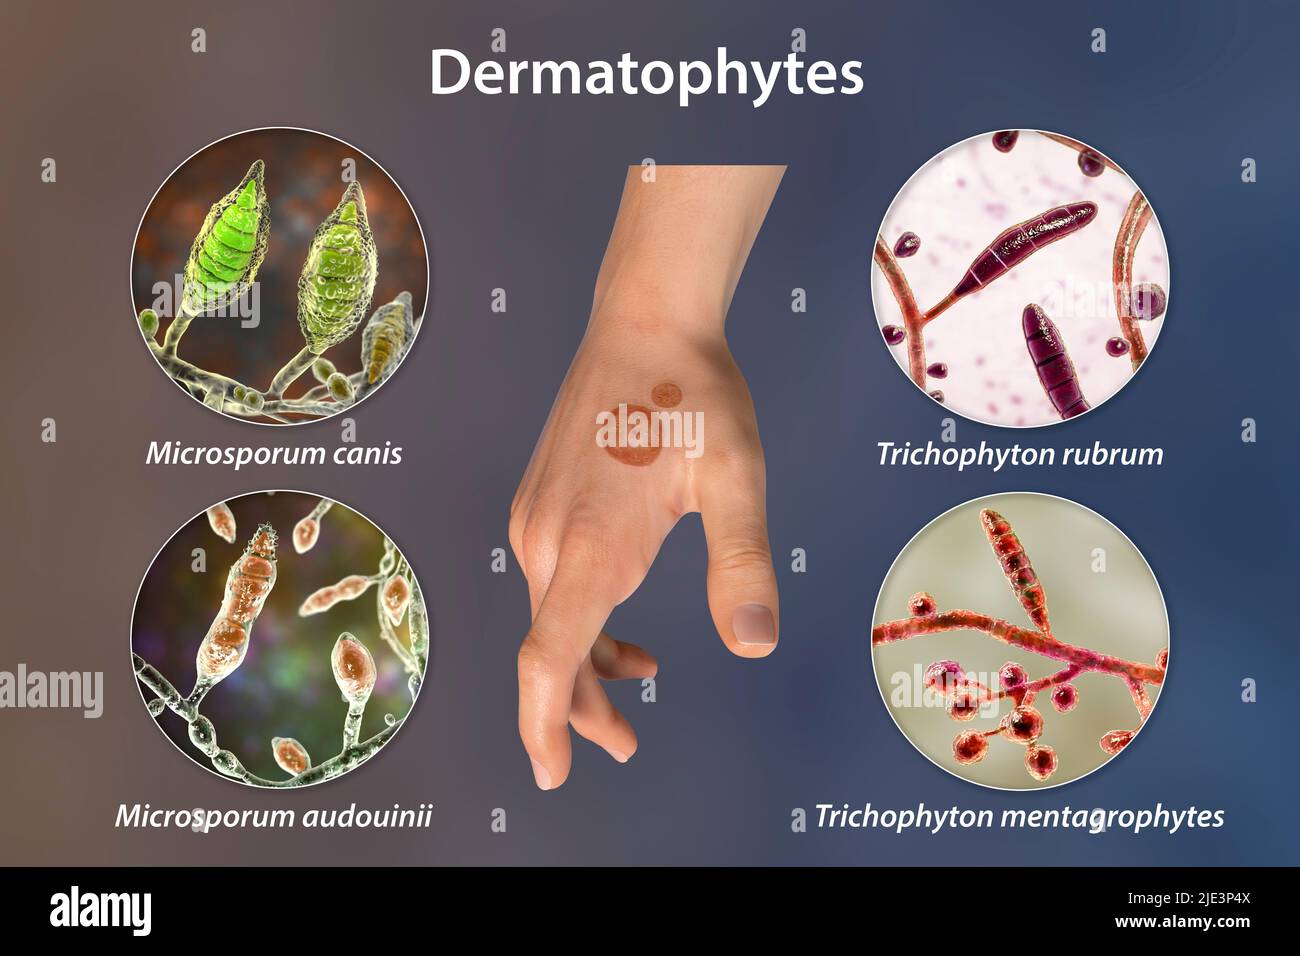 Fungal infection on a man's hand. Tinea manuum and close-up view of  dermatophyte fungi, 3D illustration Stock Illustration